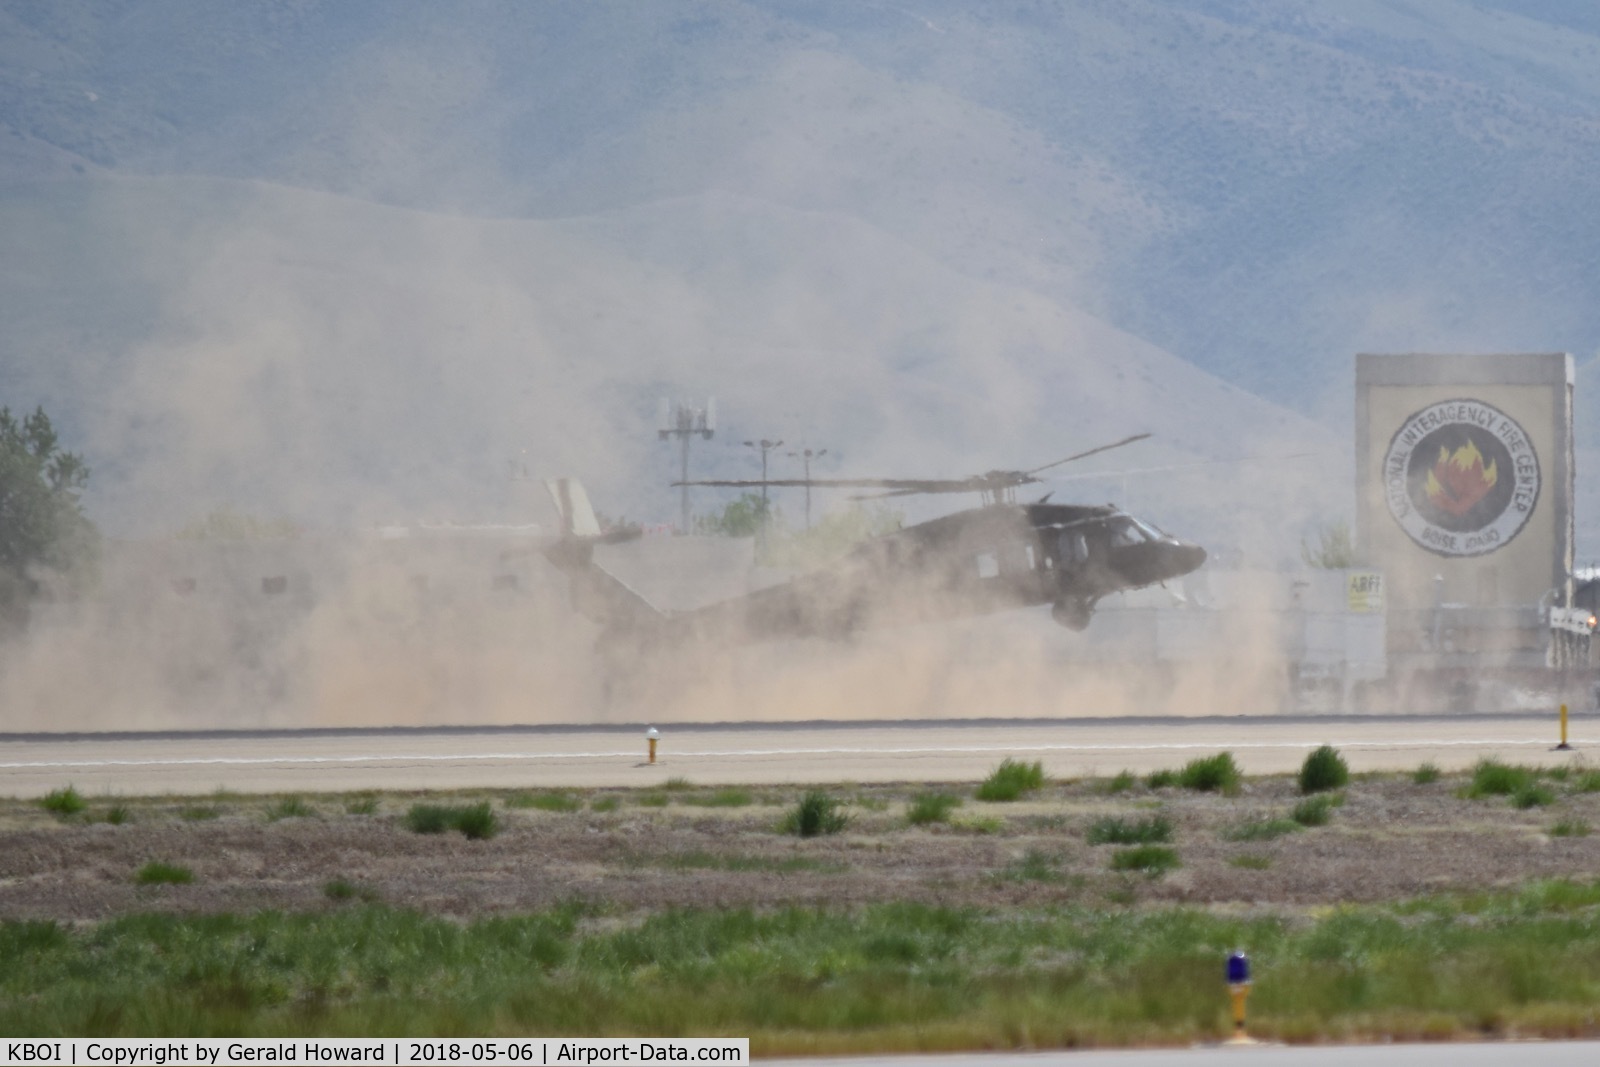 Boise Air Terminal/gowen Fld Airport (BOI) - UH-60L from the 1-183rd AVN BN, Idaho Army National Guard cleared to cross both runways. Apparently strayed from the taxiway.
